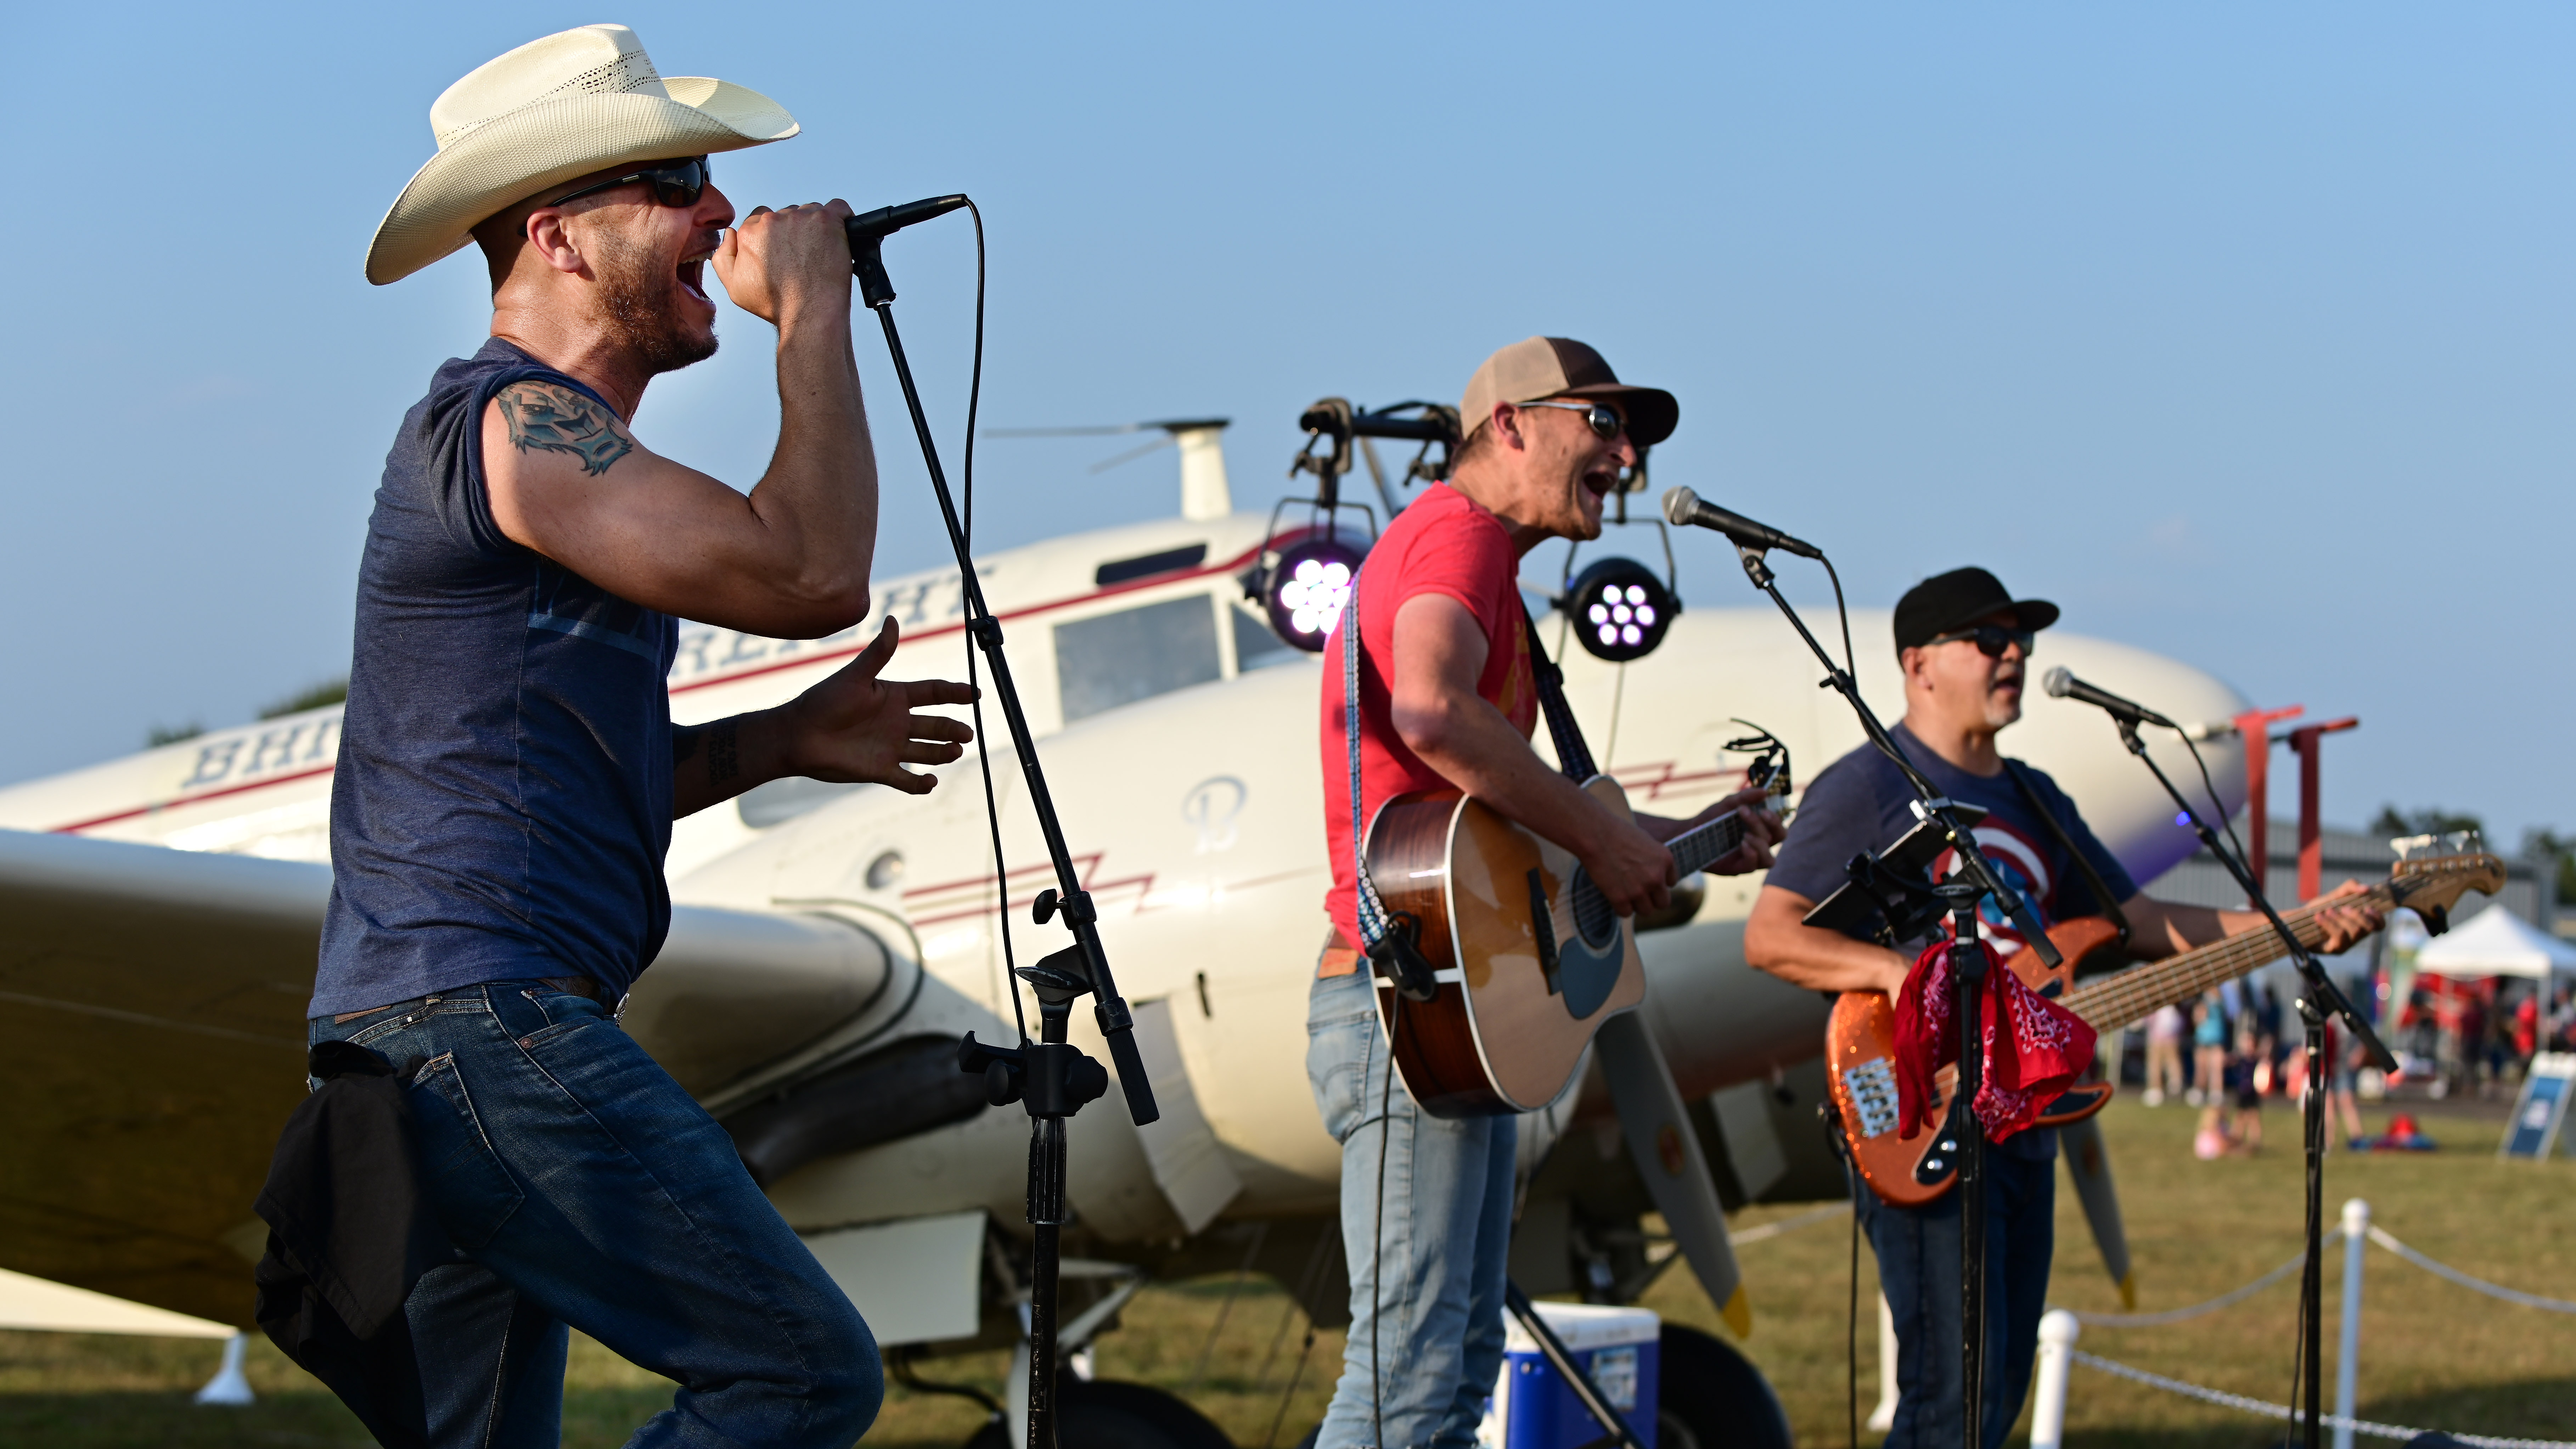 20 songs for your aviation playlist - AOPA